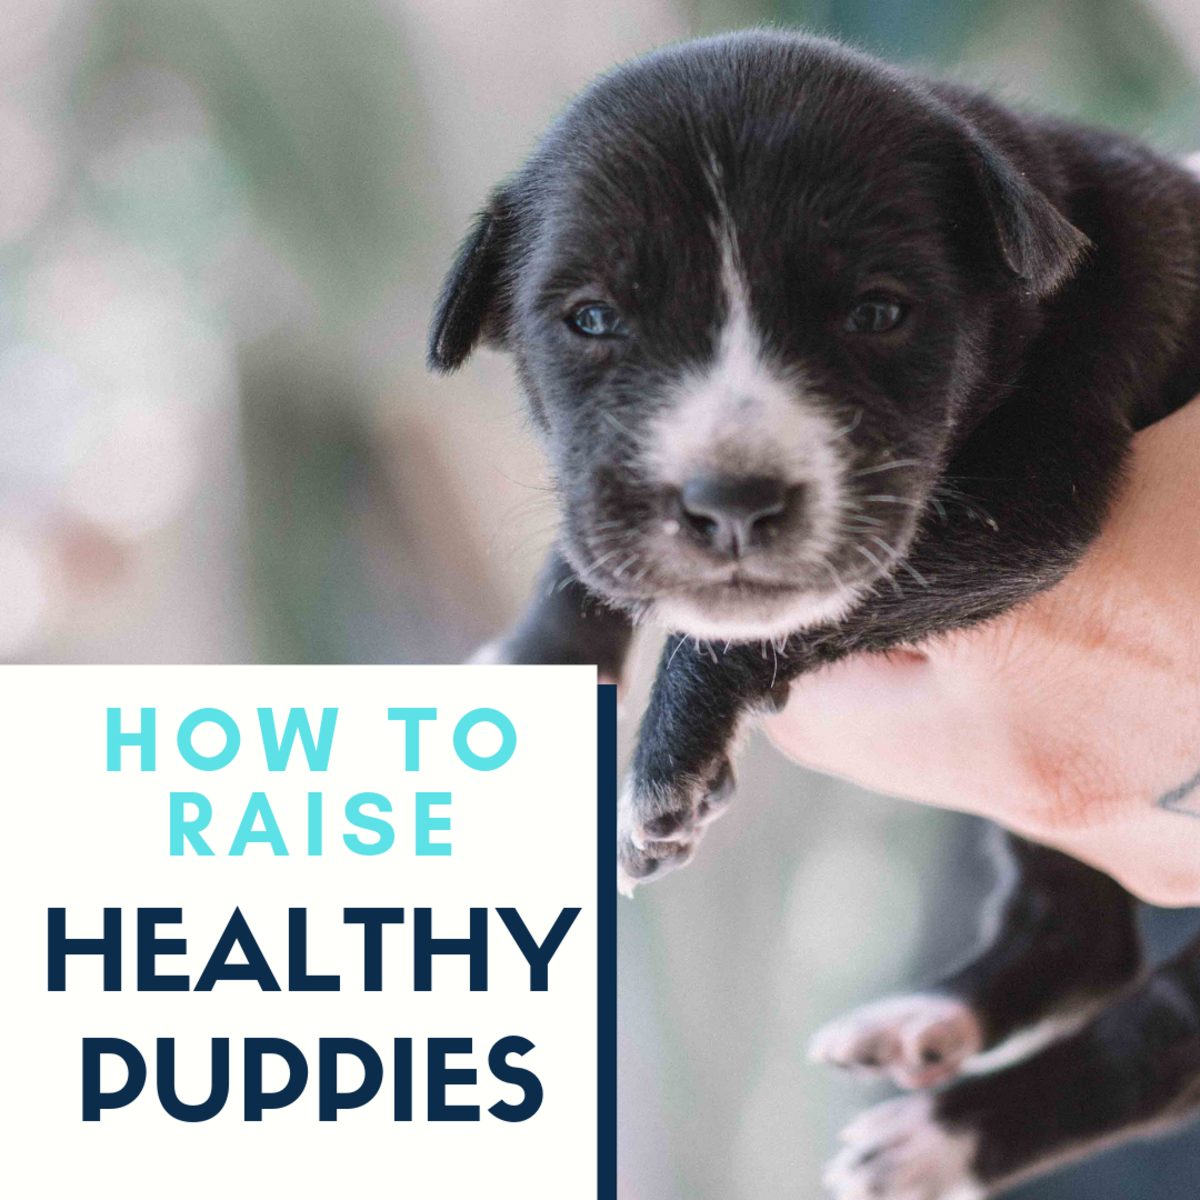 How to Raise Healthy Puppies